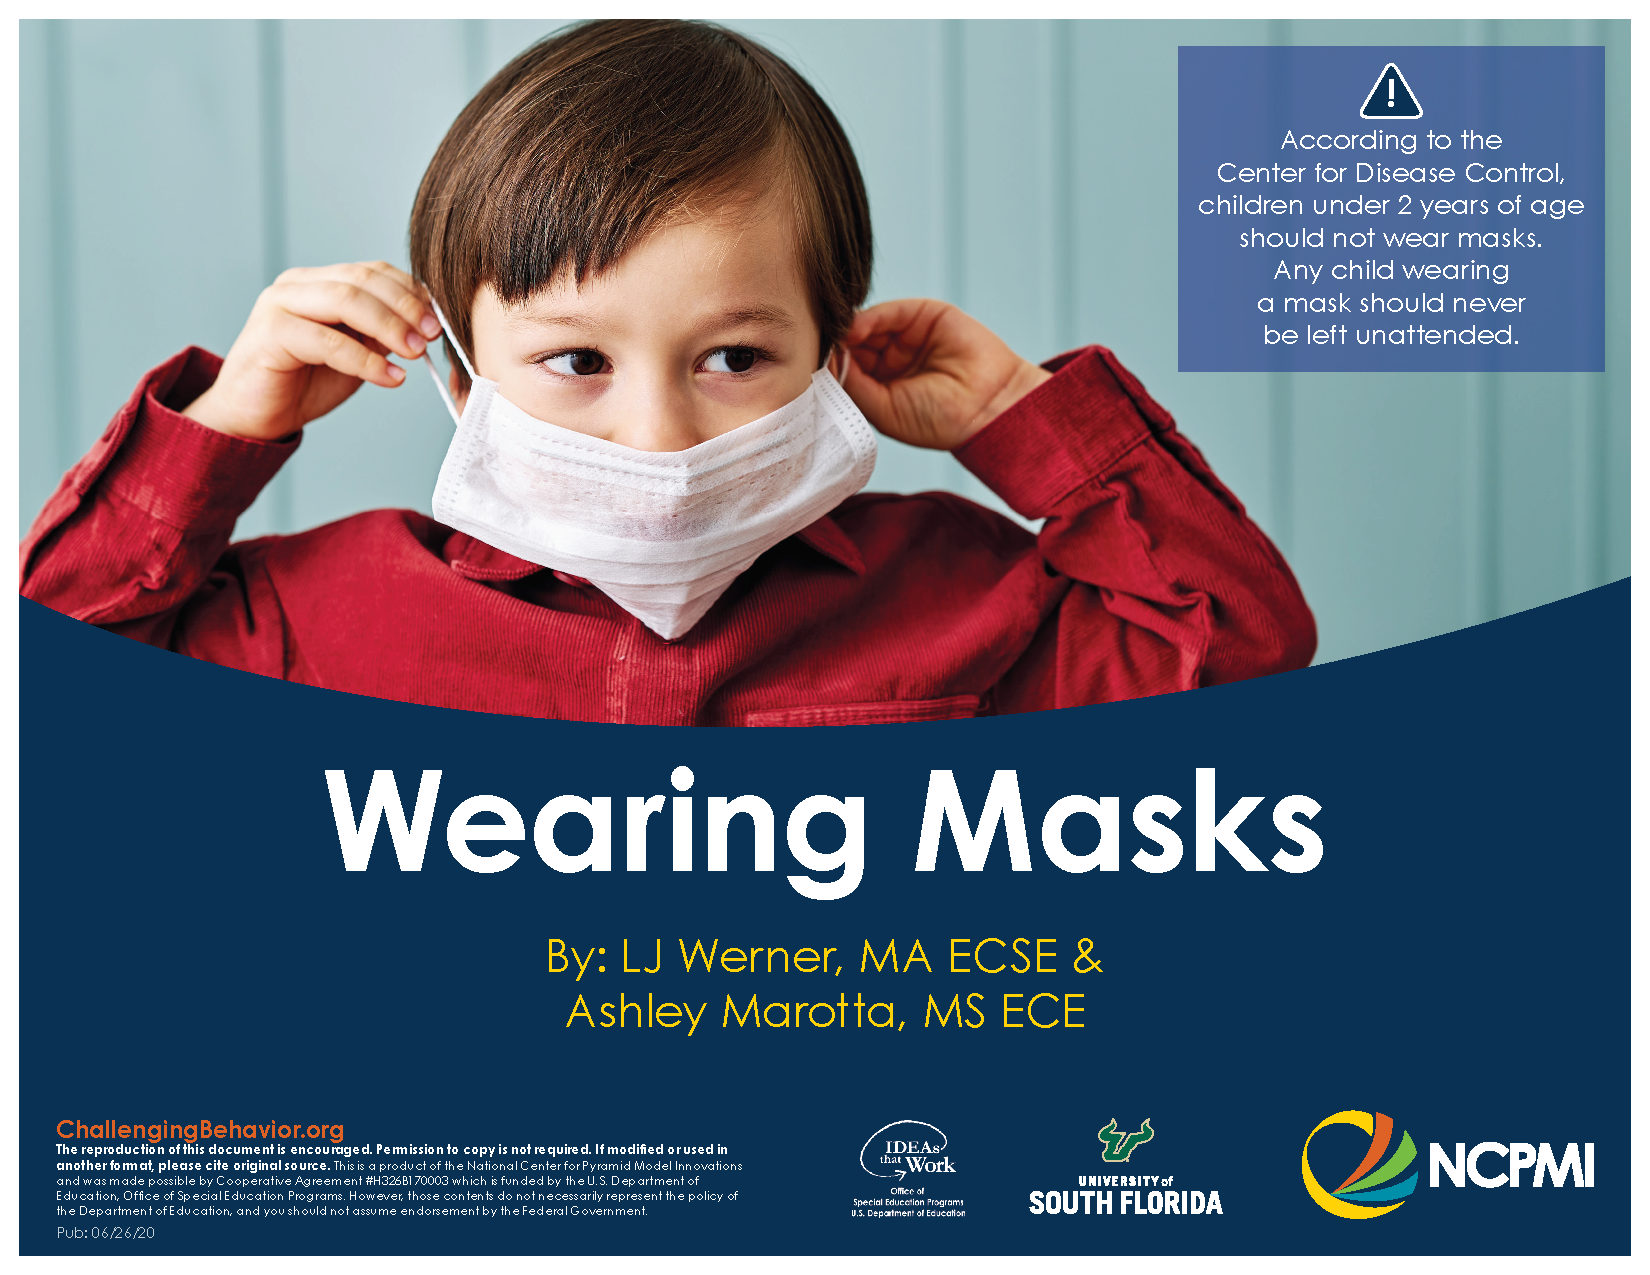 CSRWire - New Hanes #MaskAround Campaign Encourages Americans to Wear Face  Masks as Brand Donates 1 Million Masks to Those Experiencing Homelessness